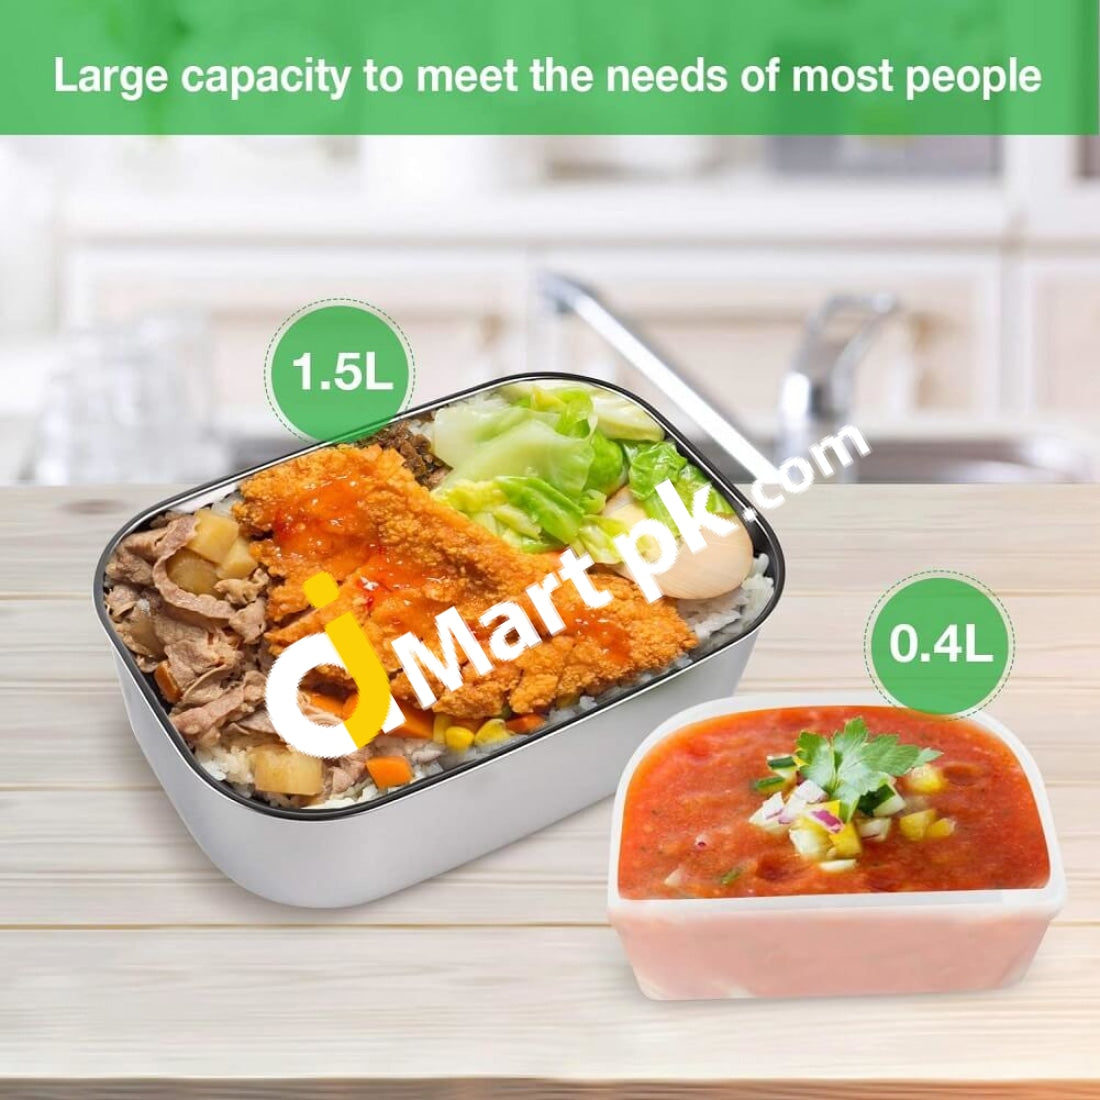 Electric Heating Lunch Box Food Heater/Warmer Portable Heated Lunch Boxes  for Car truck and Home Work Adults Electric Lunch Box - Leak Proof, 1.5L  Removable 304 Stainless Steel Container 